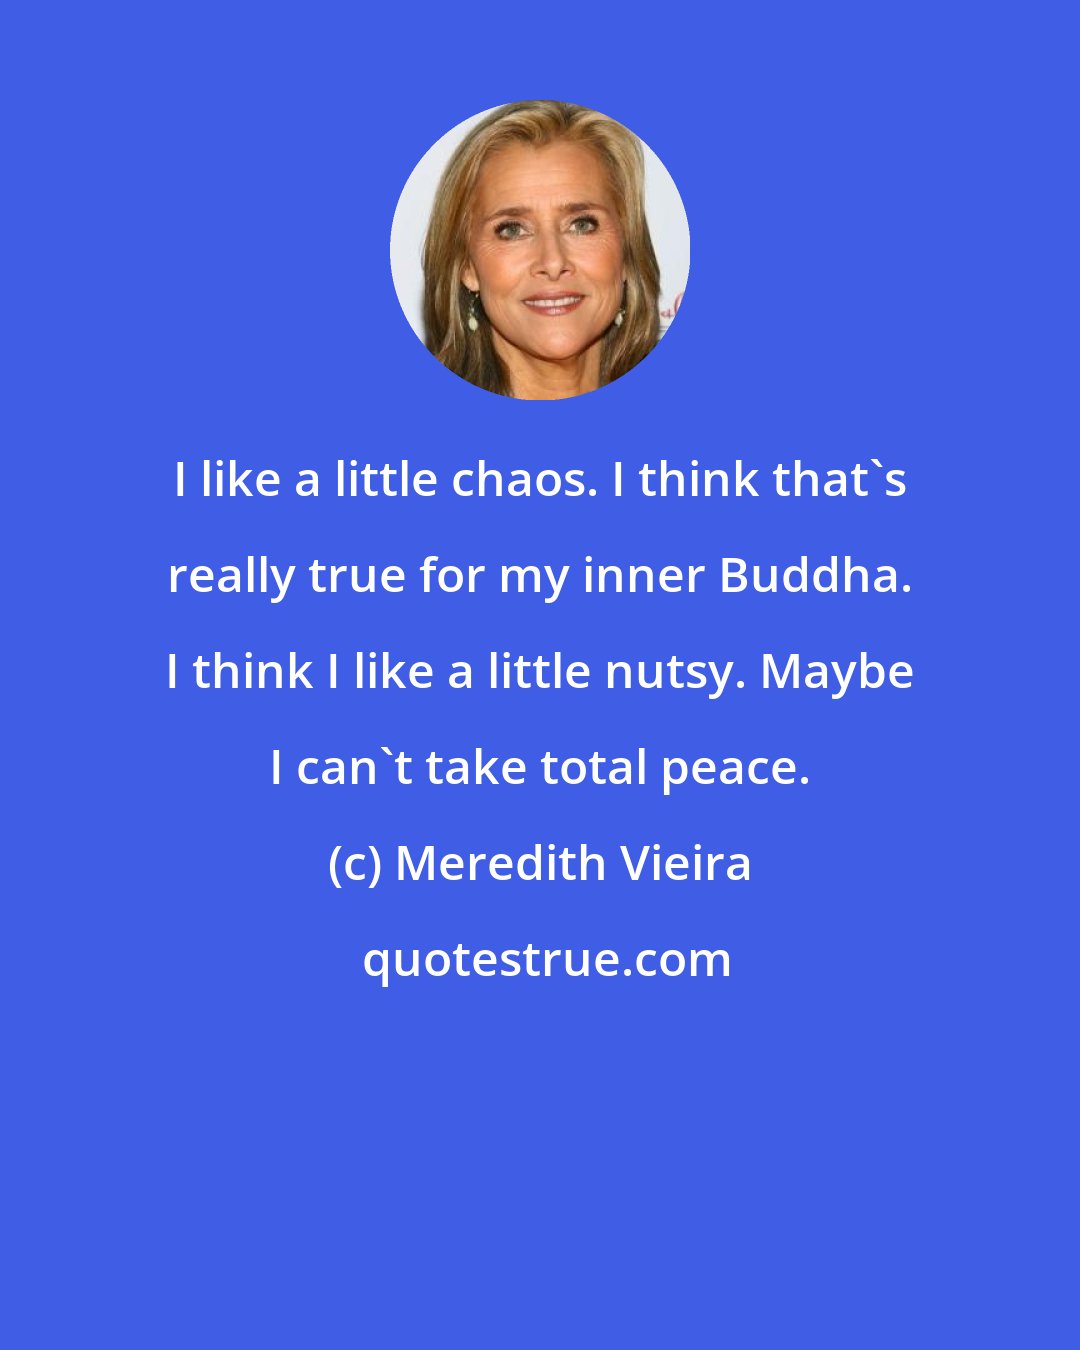 Meredith Vieira: I like a little chaos. I think that's really true for my inner Buddha. I think I like a little nutsy. Maybe I can't take total peace.